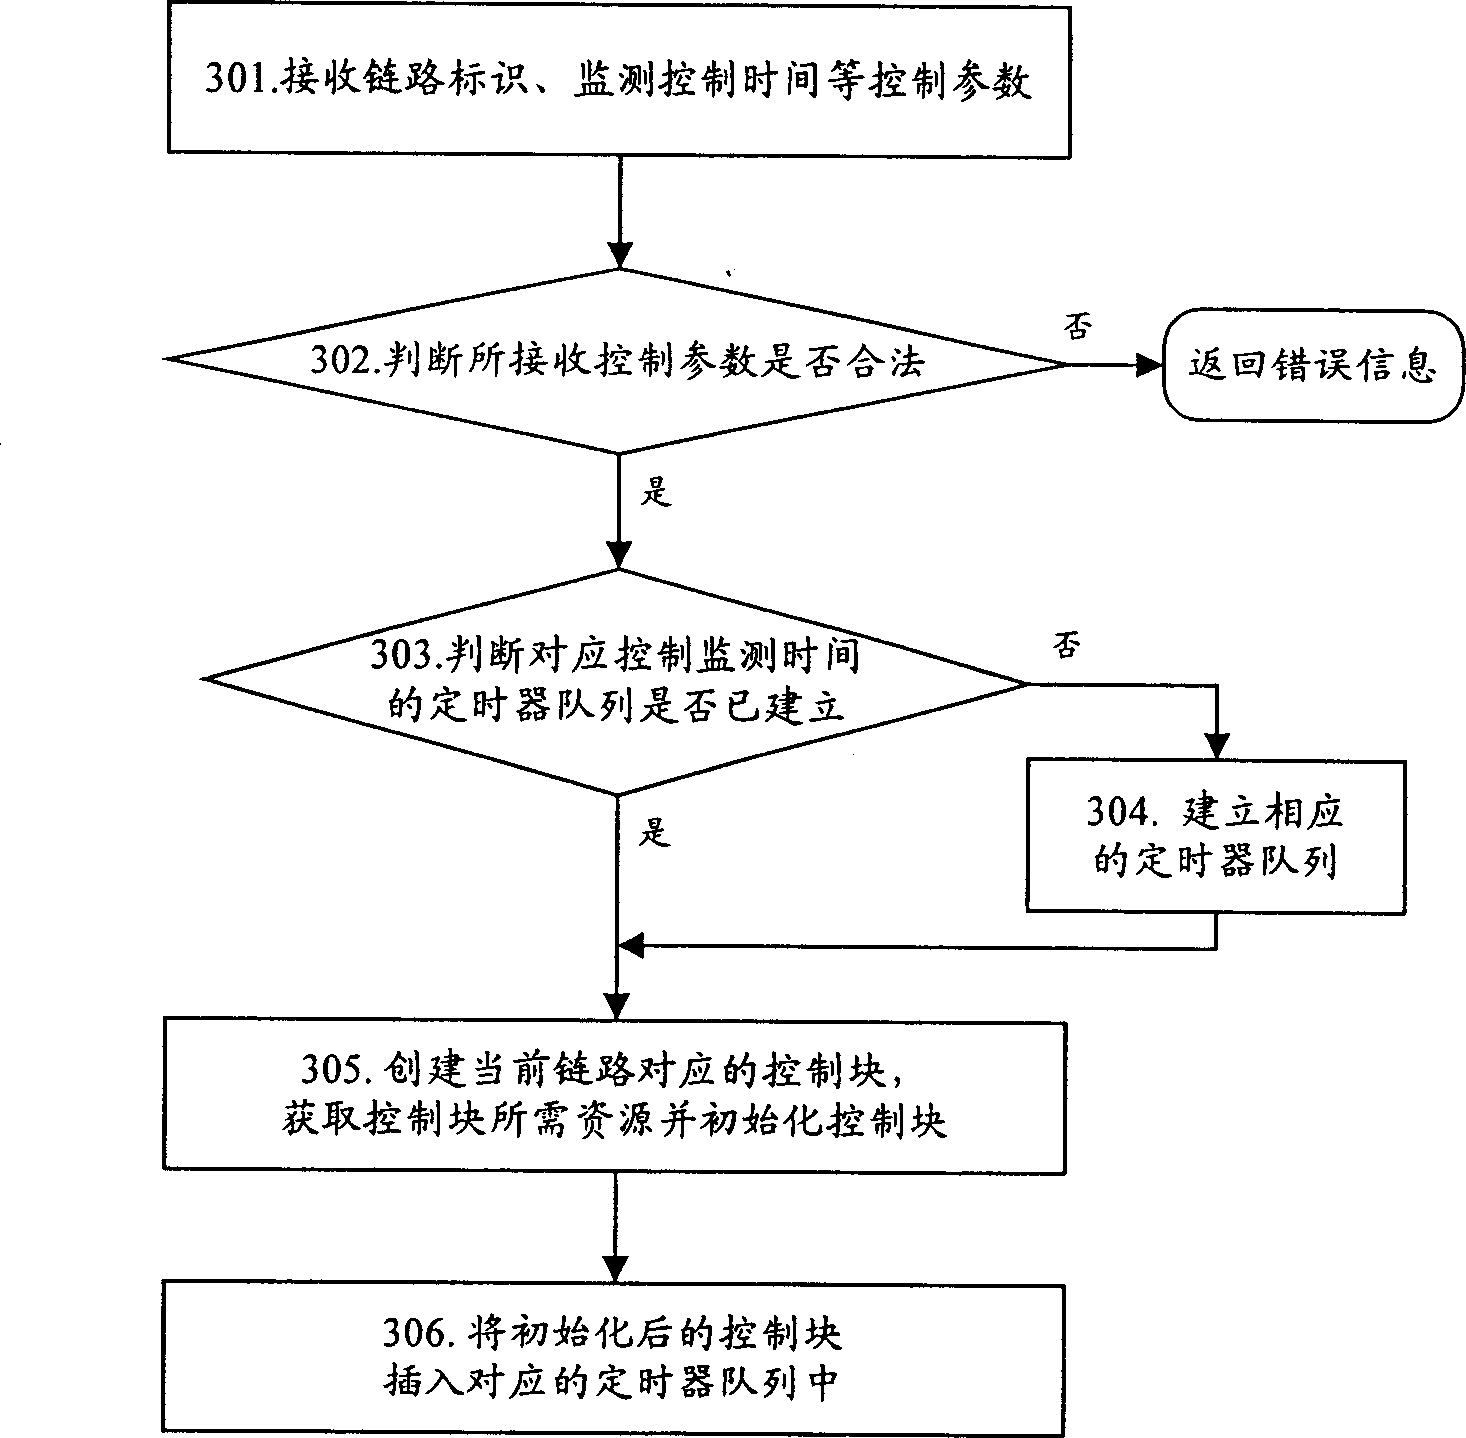 Method for monitoring and maintaining multi-data link